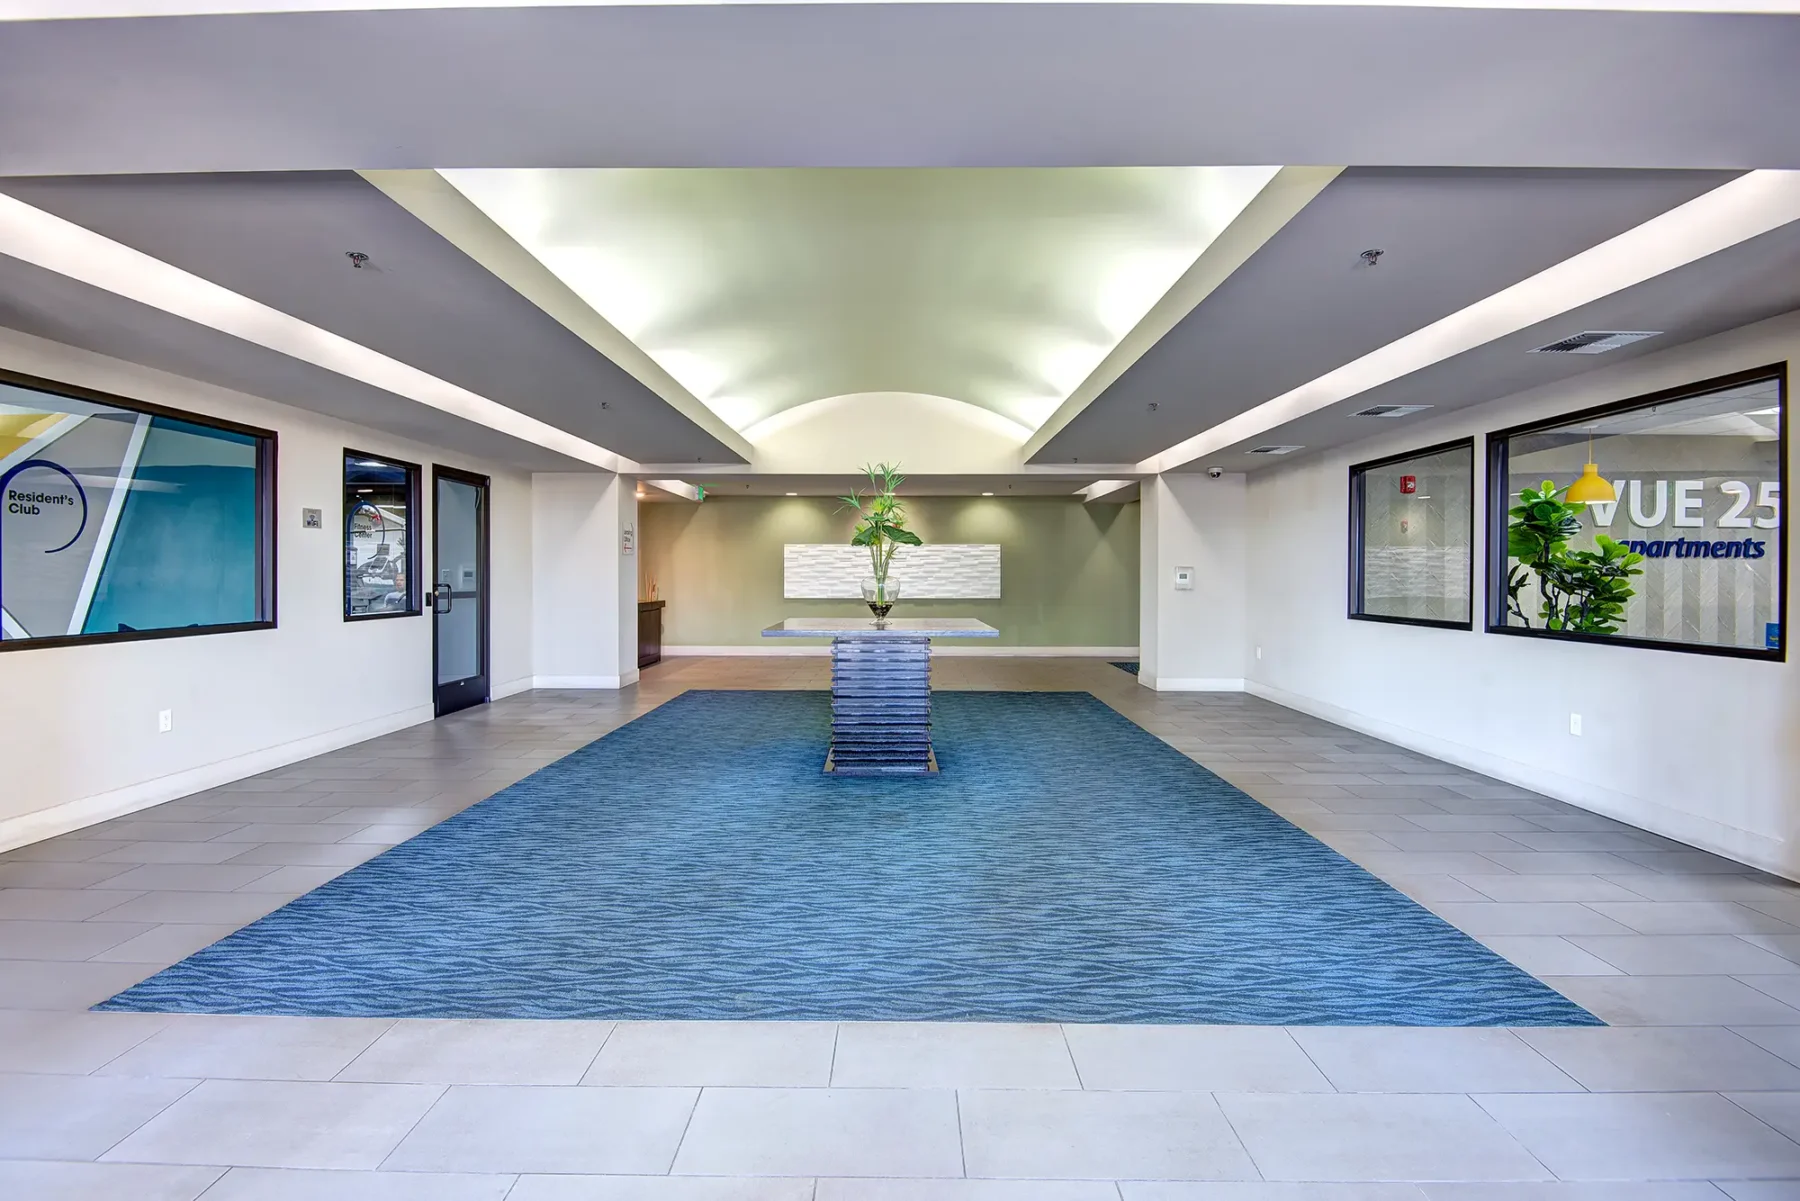 Large lobby area with a small table in the center